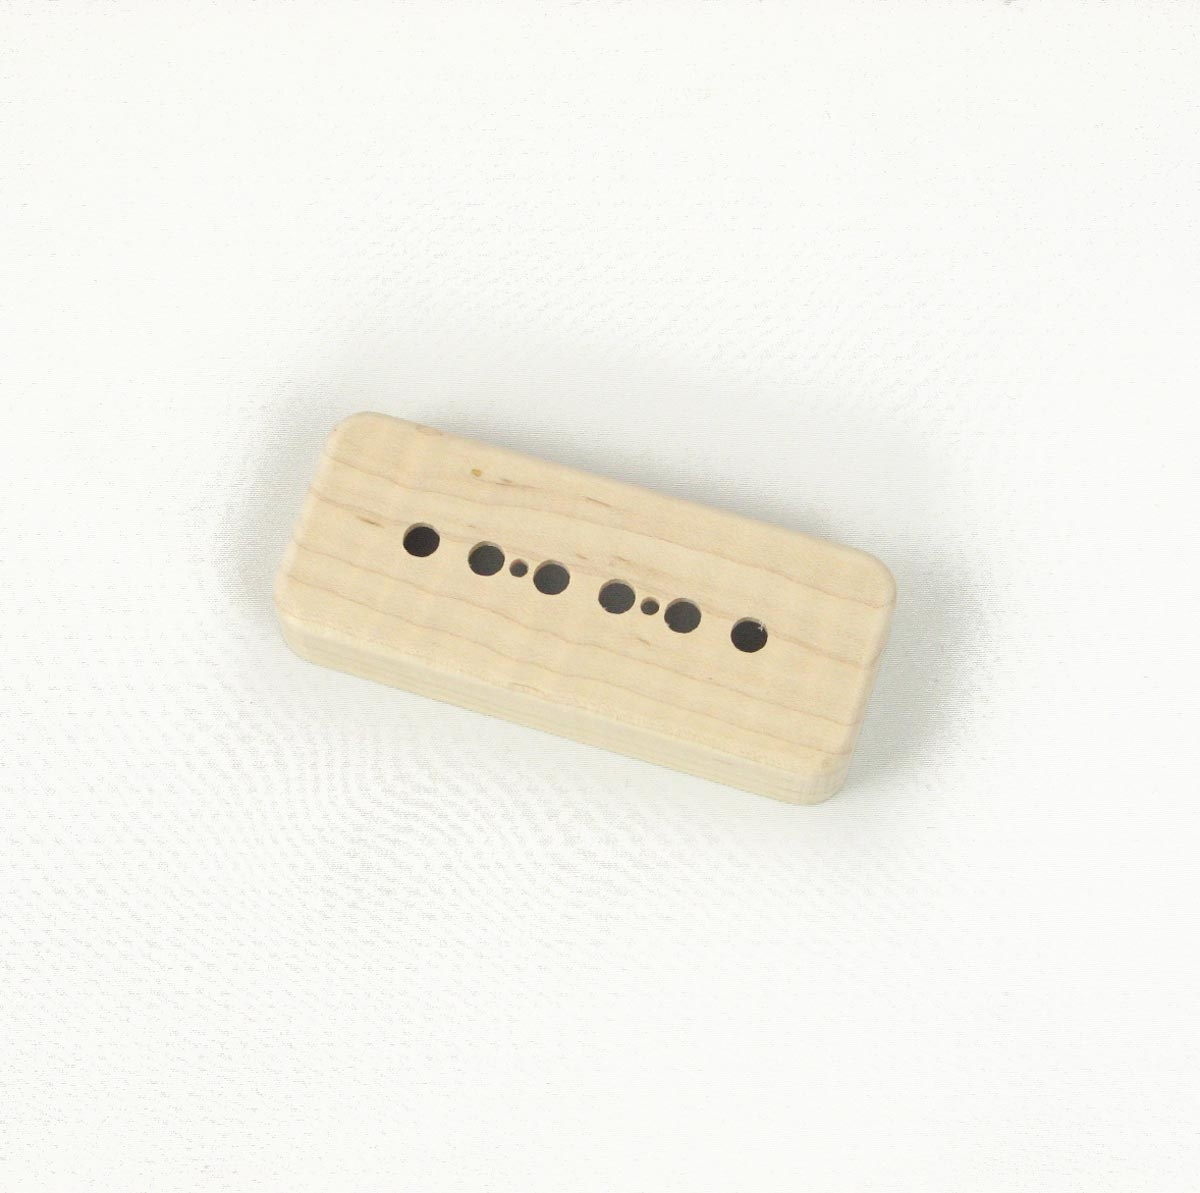 Guilford Guilford Flame Maple P-90 Cover Seymour Duncan spacing